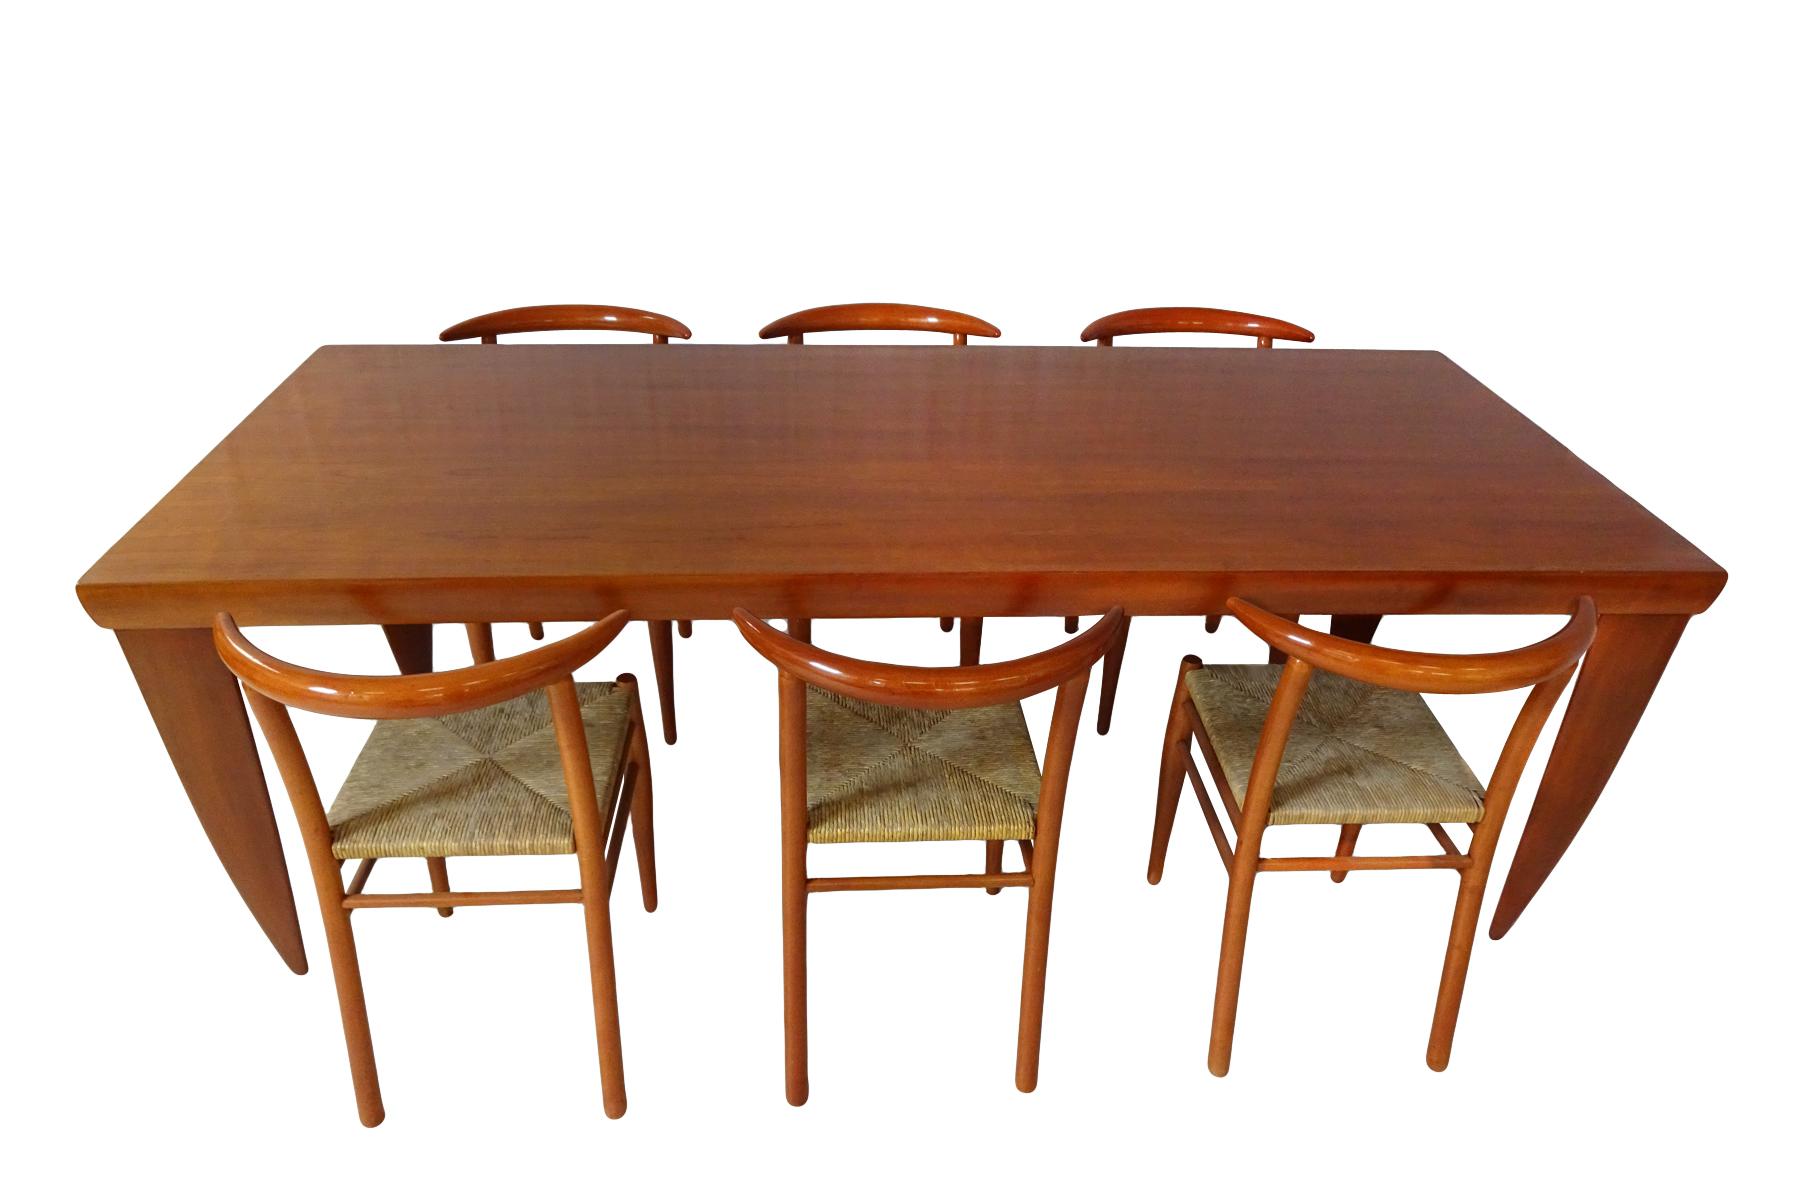 An impressive and substantial dining set incorporating a large solid cherrywood dining table matched with 6 Philippe Starck cherrywood Tessa nature chairs.

Although they are by separate design teams this dining set is an excellent match. Both in